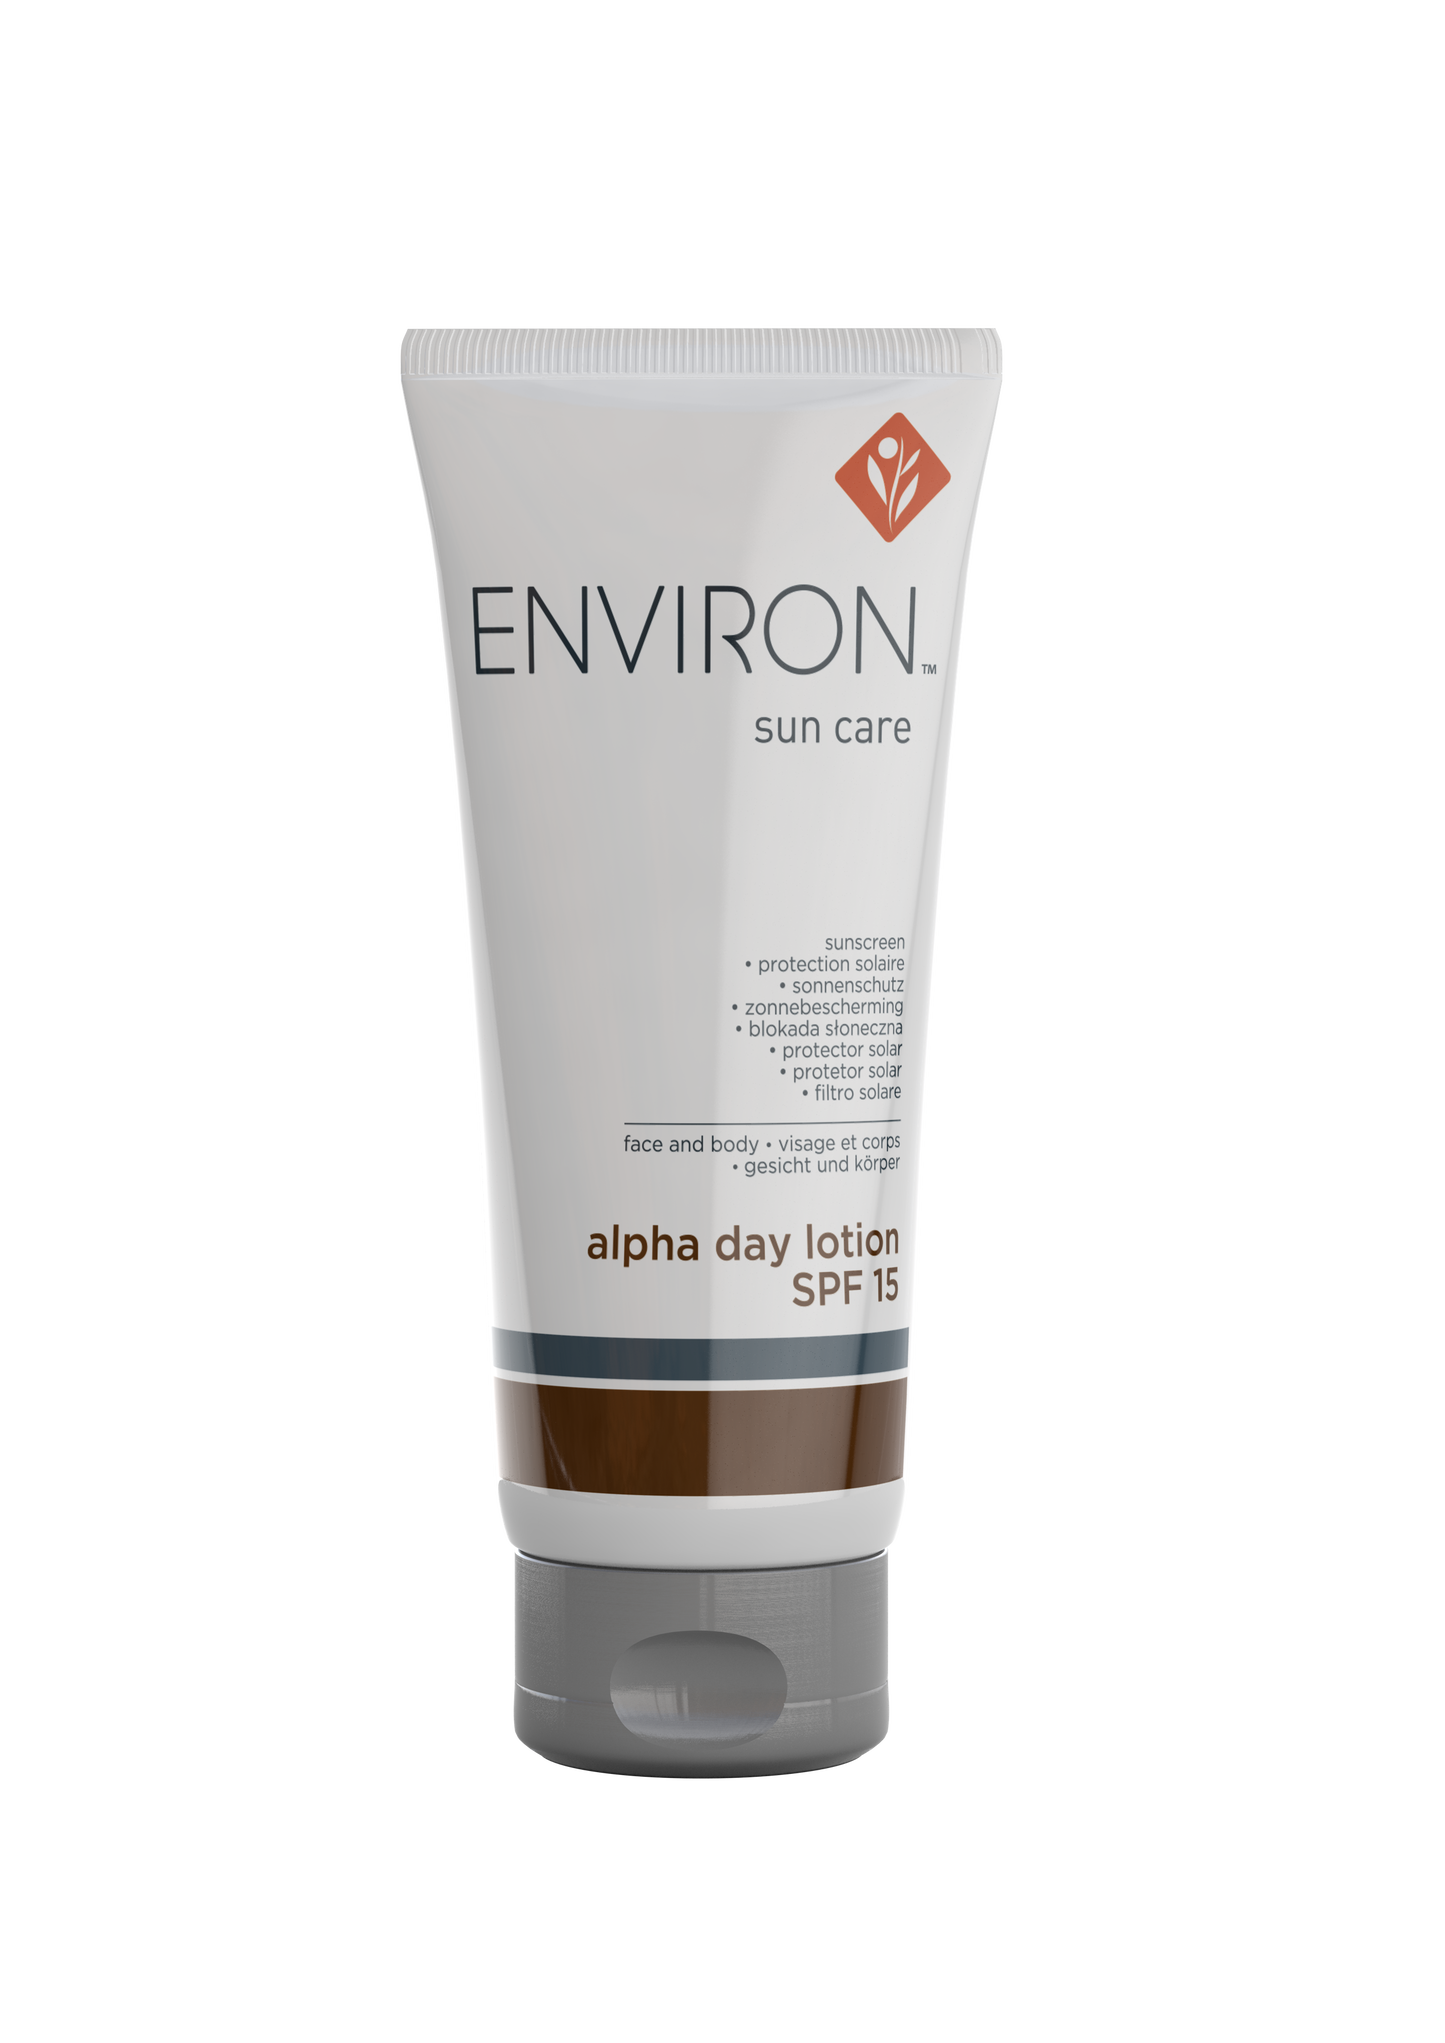 Environ Alpha Day Lotion